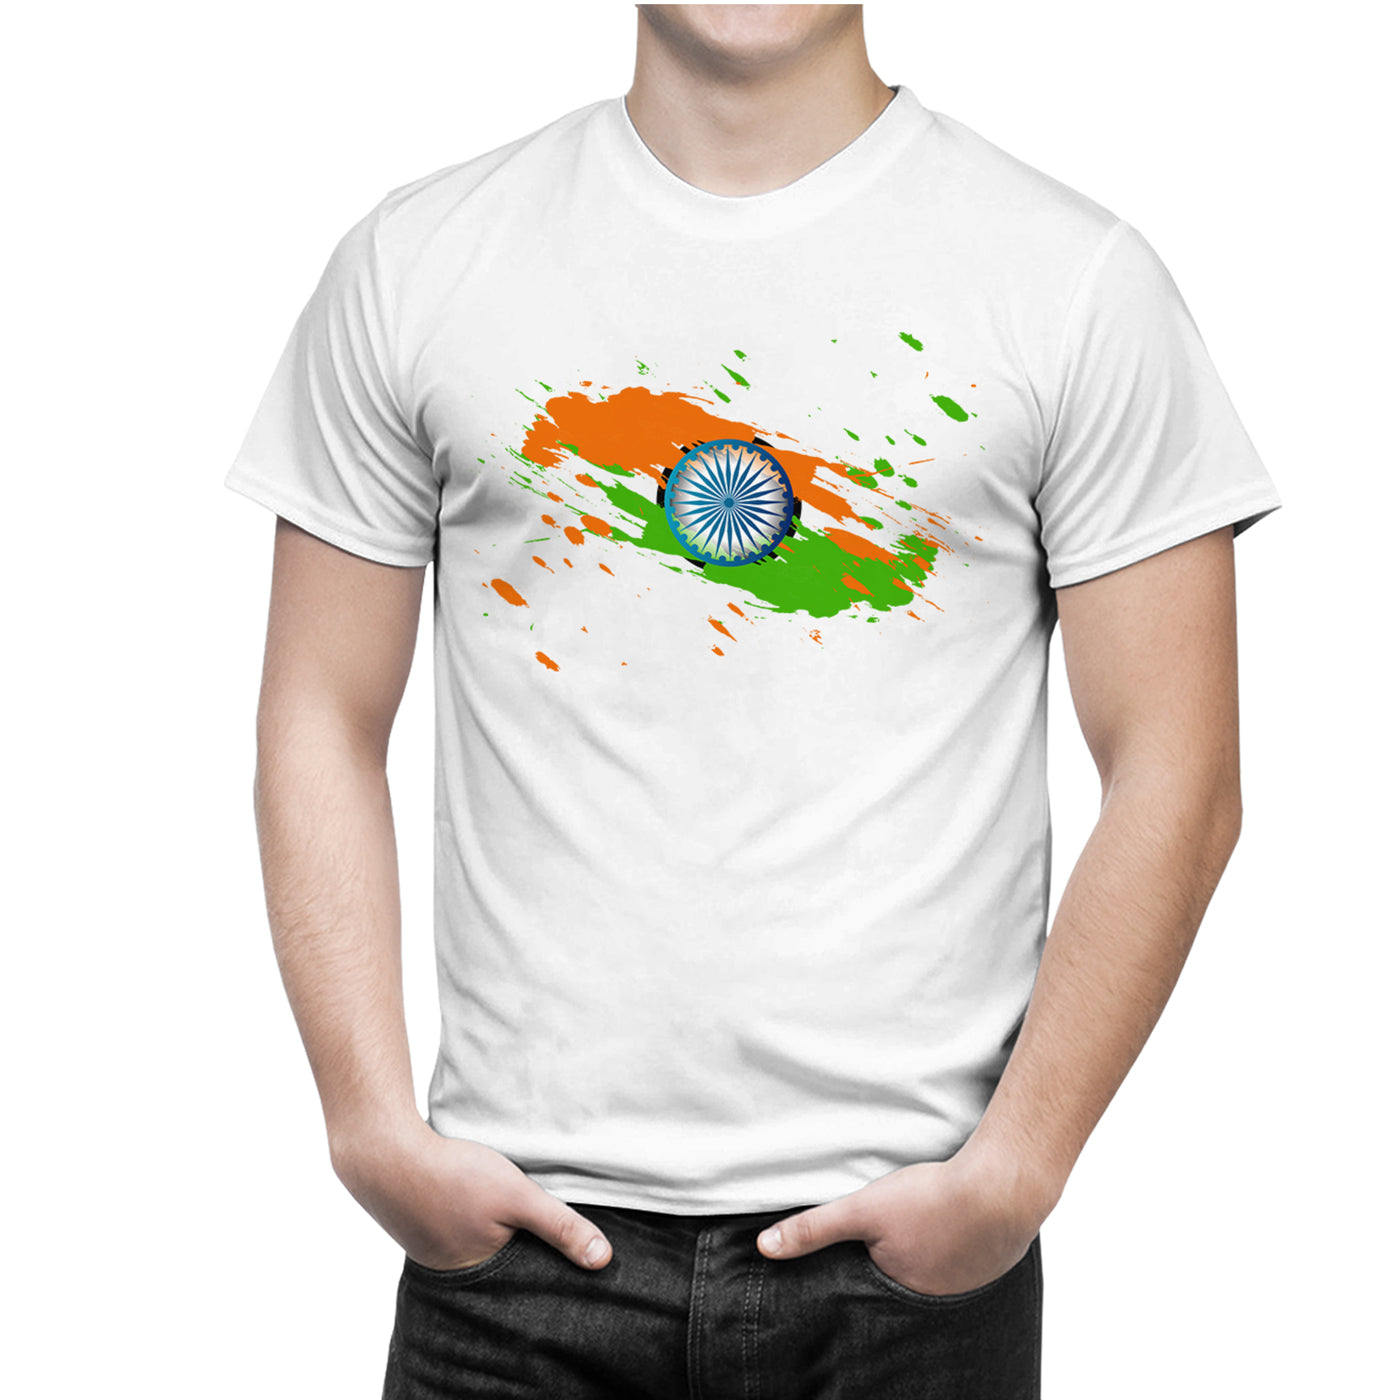 iberry's Independence day t shirt | Republic day t shirts |India t shirts |Patriotic tshirt |15 August t shirts |Round neck cotton tshirts -08